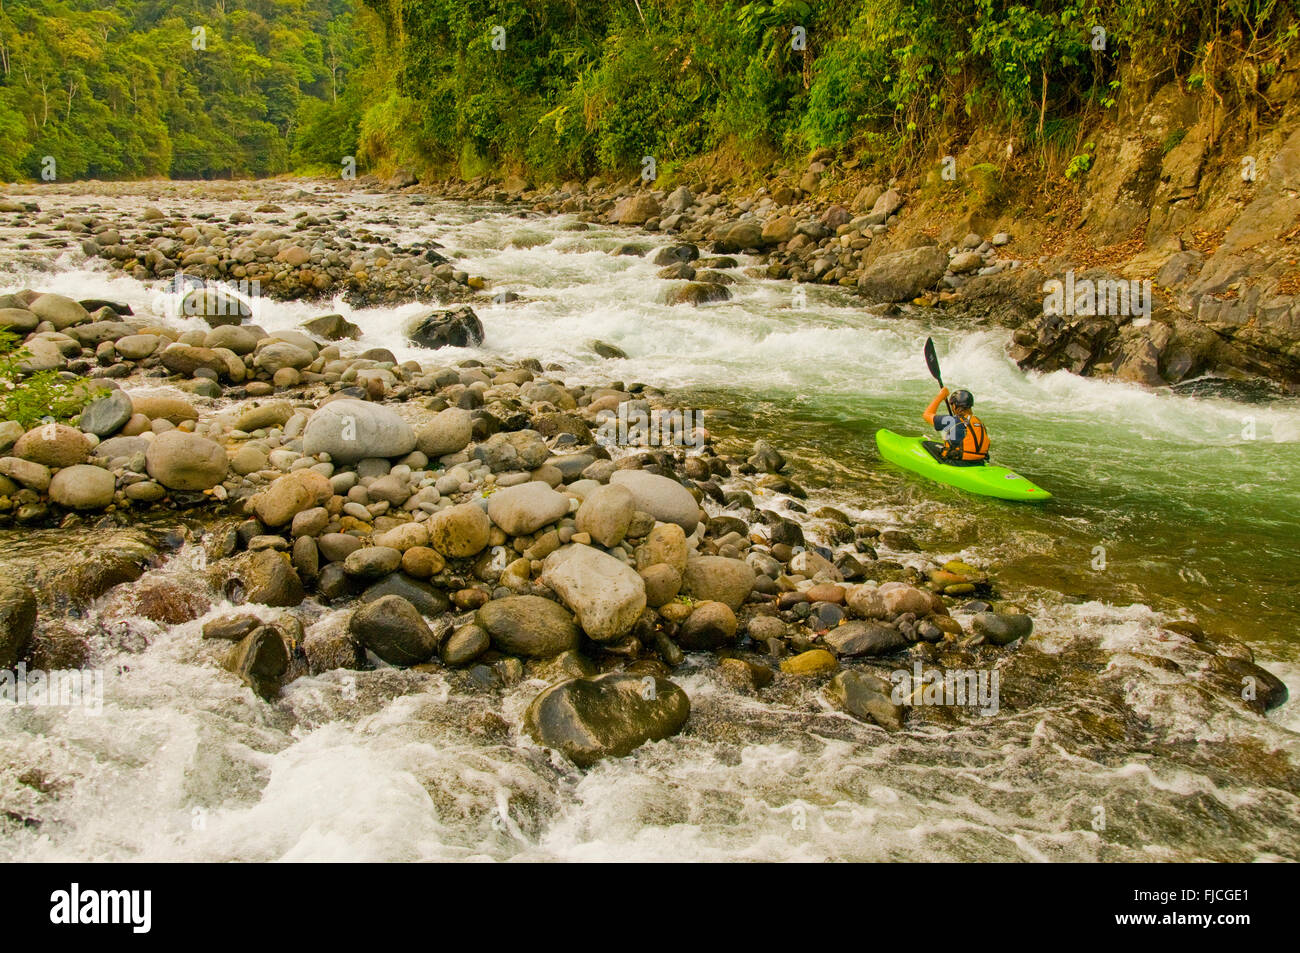 Kayaker paddling on the Lower Pacuare River. Costa Rica Stock Photo